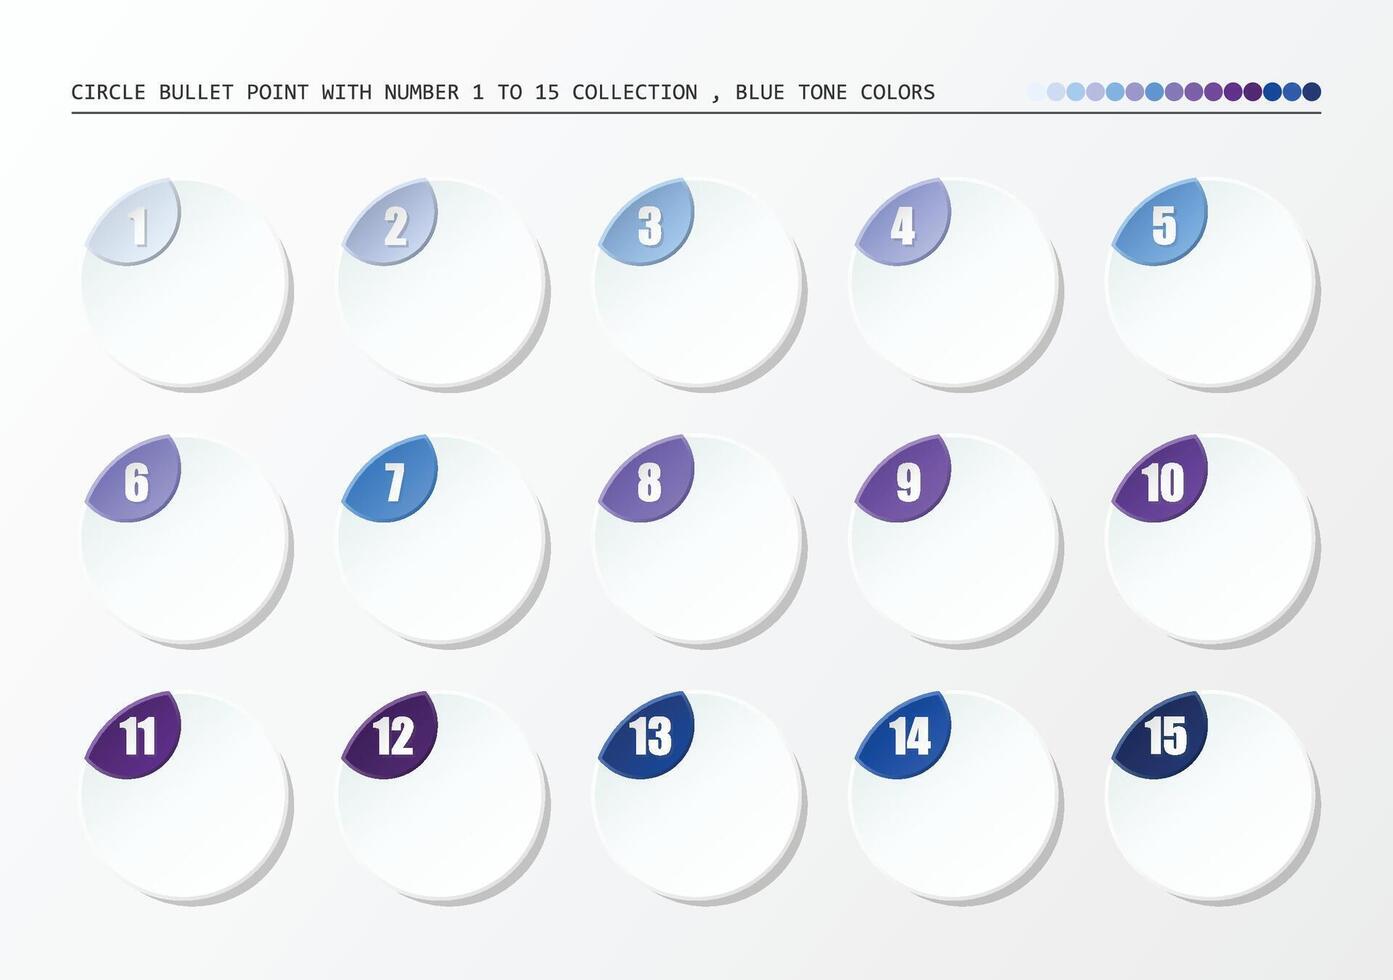 Circle bullet with number collection. Numbers from 1 to 15. Blue tone color. vector